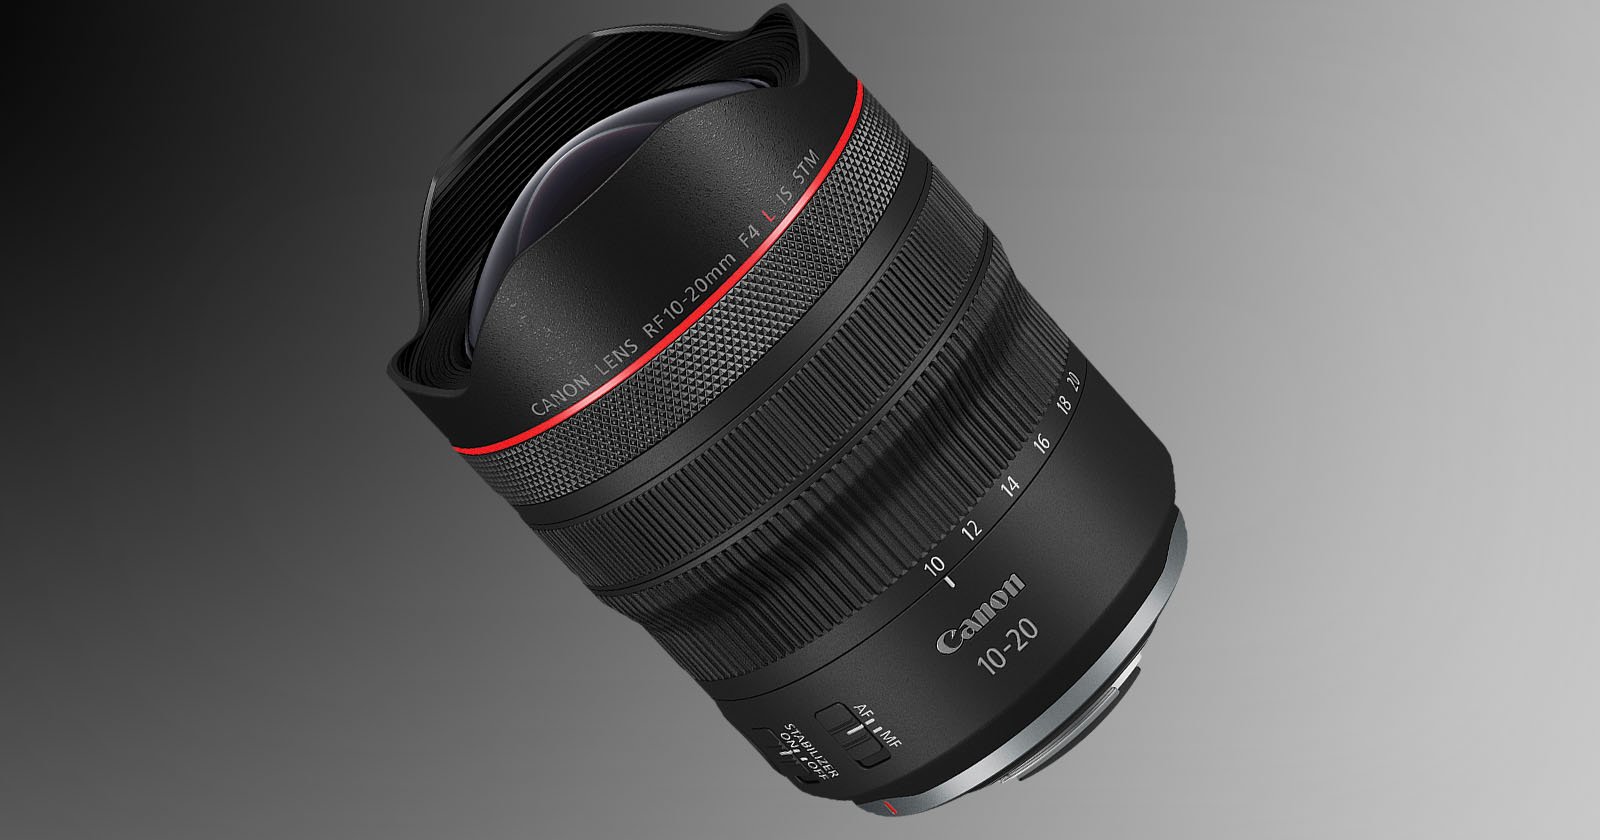 No, Sigma Did Not Make Canons New 10-20mm f/4 L IS STM Lens